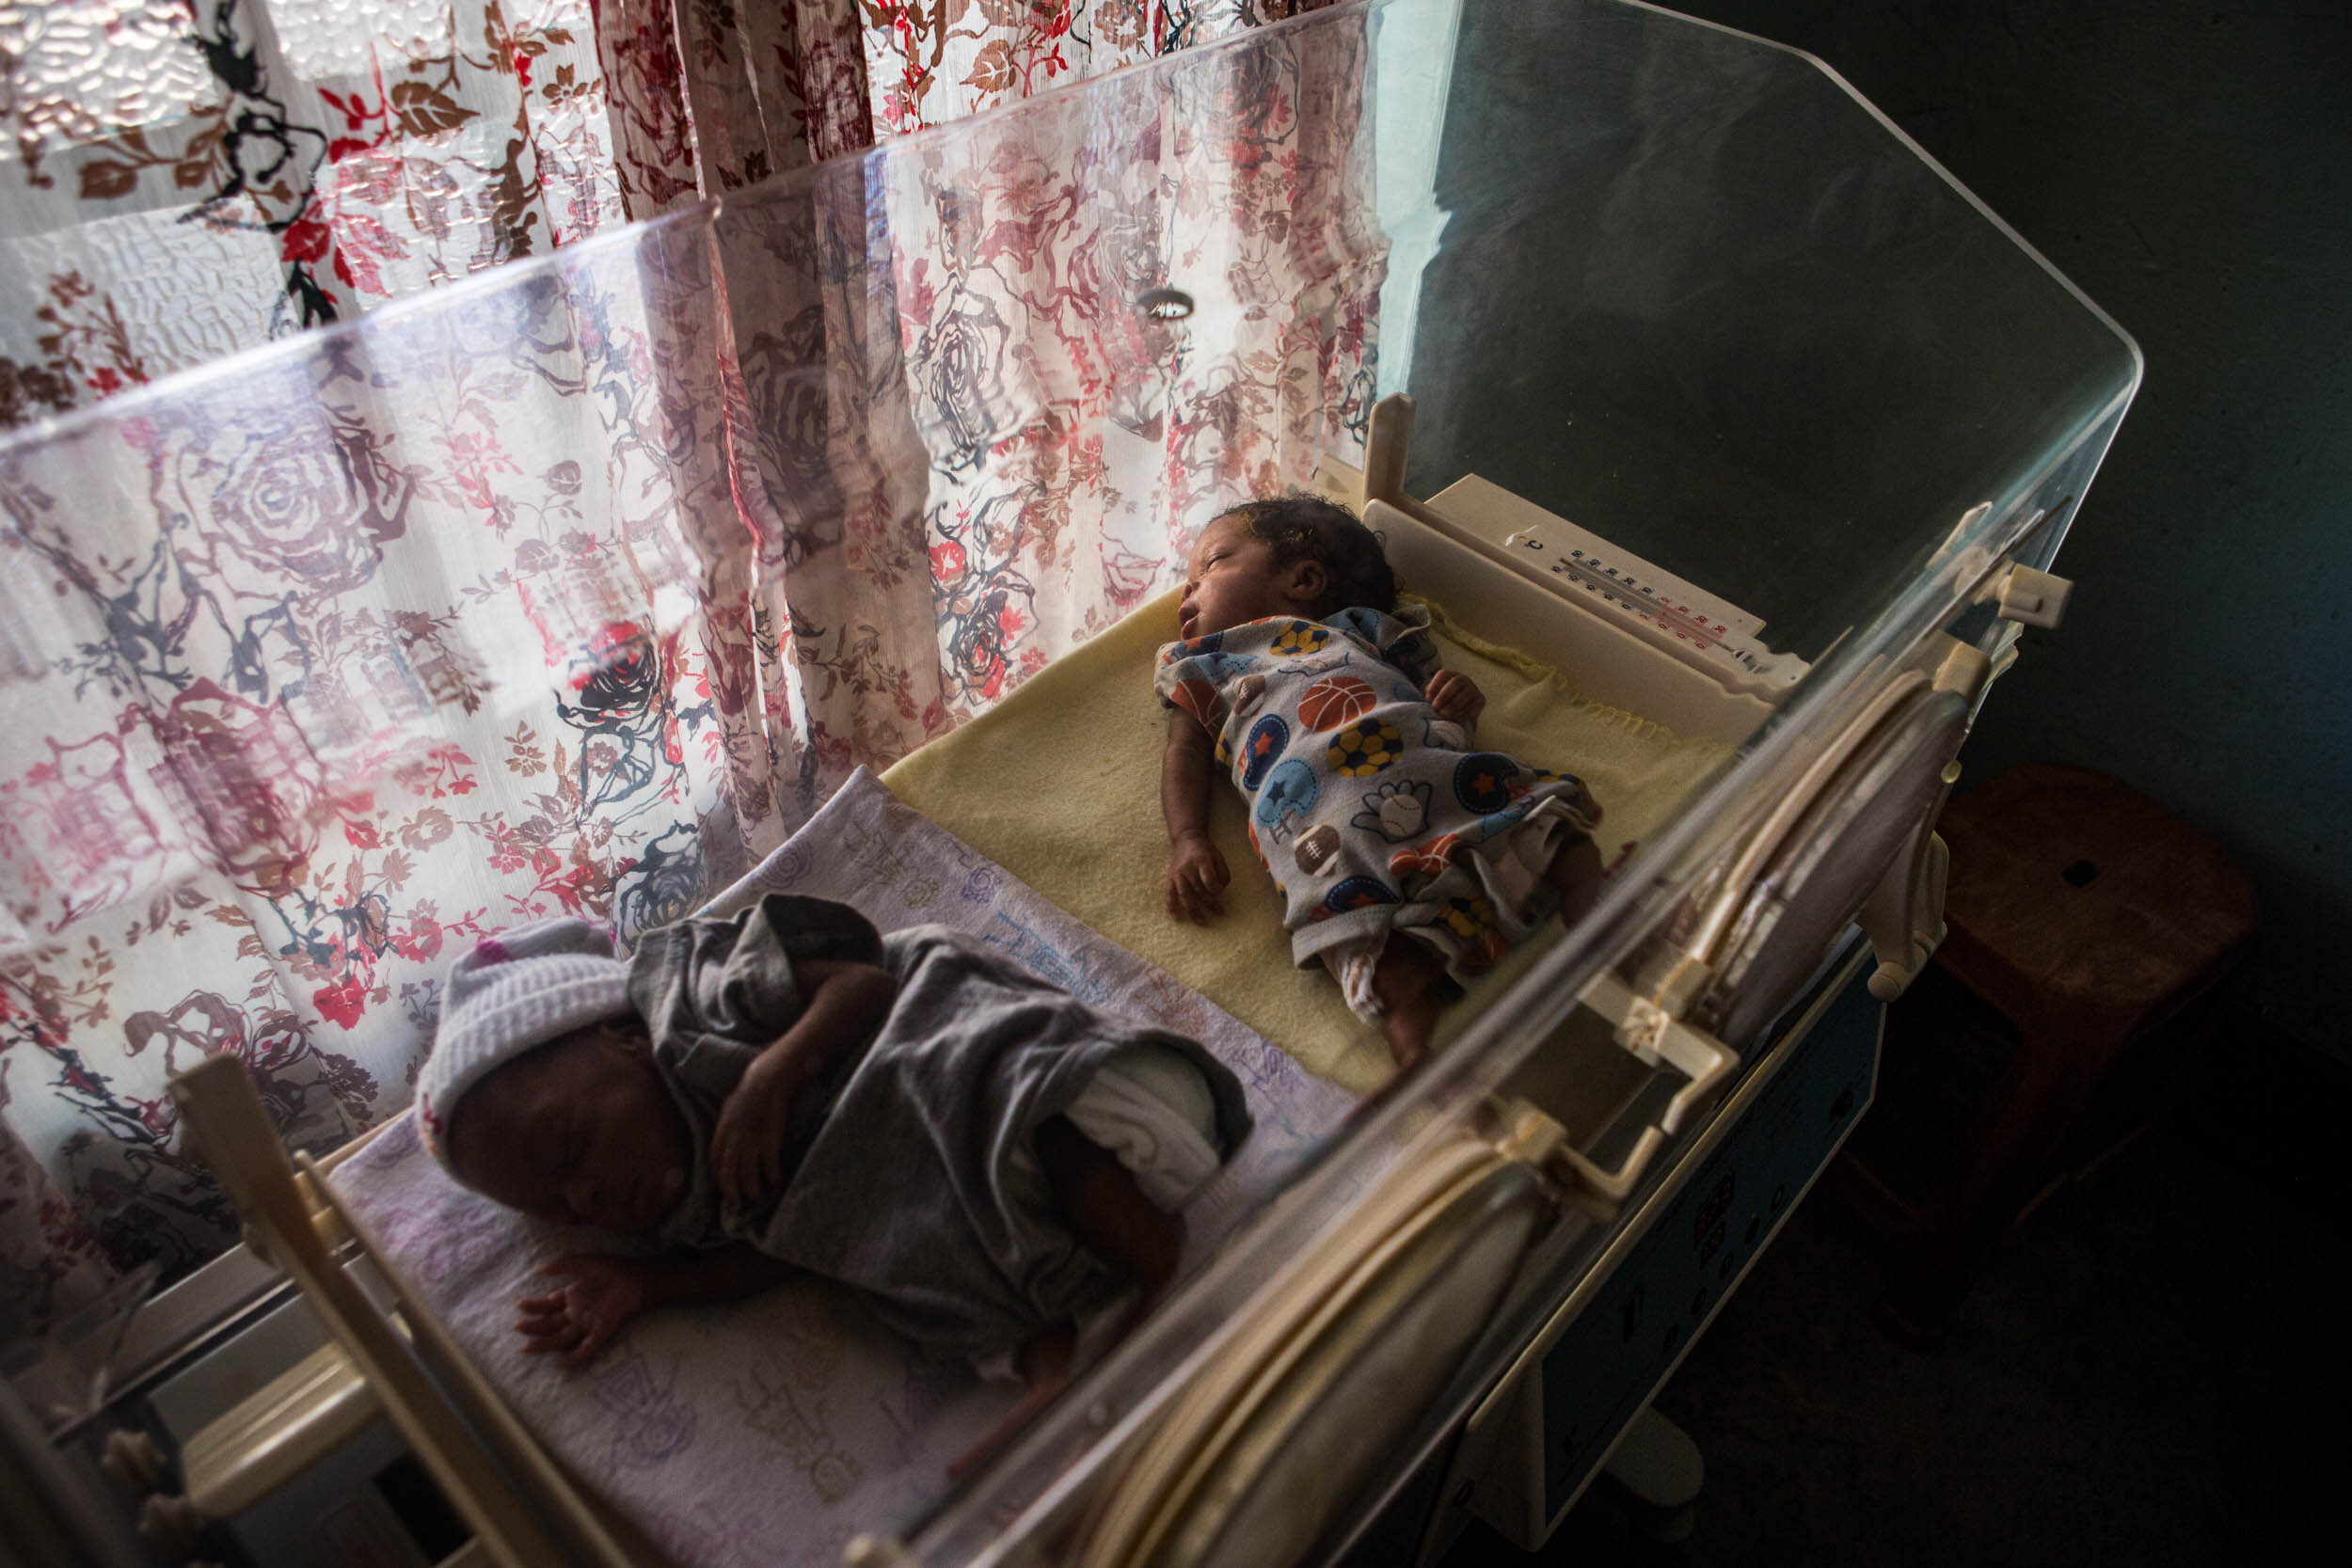  Two premature babies at the Hospital Saint Charles Lwanga in Kipushi. "A high number of premature births is also linked to the exposure of toxics", says Tony Kayembe, scientist at the University of Lubumbashi. Kipushi is a small town with the majori